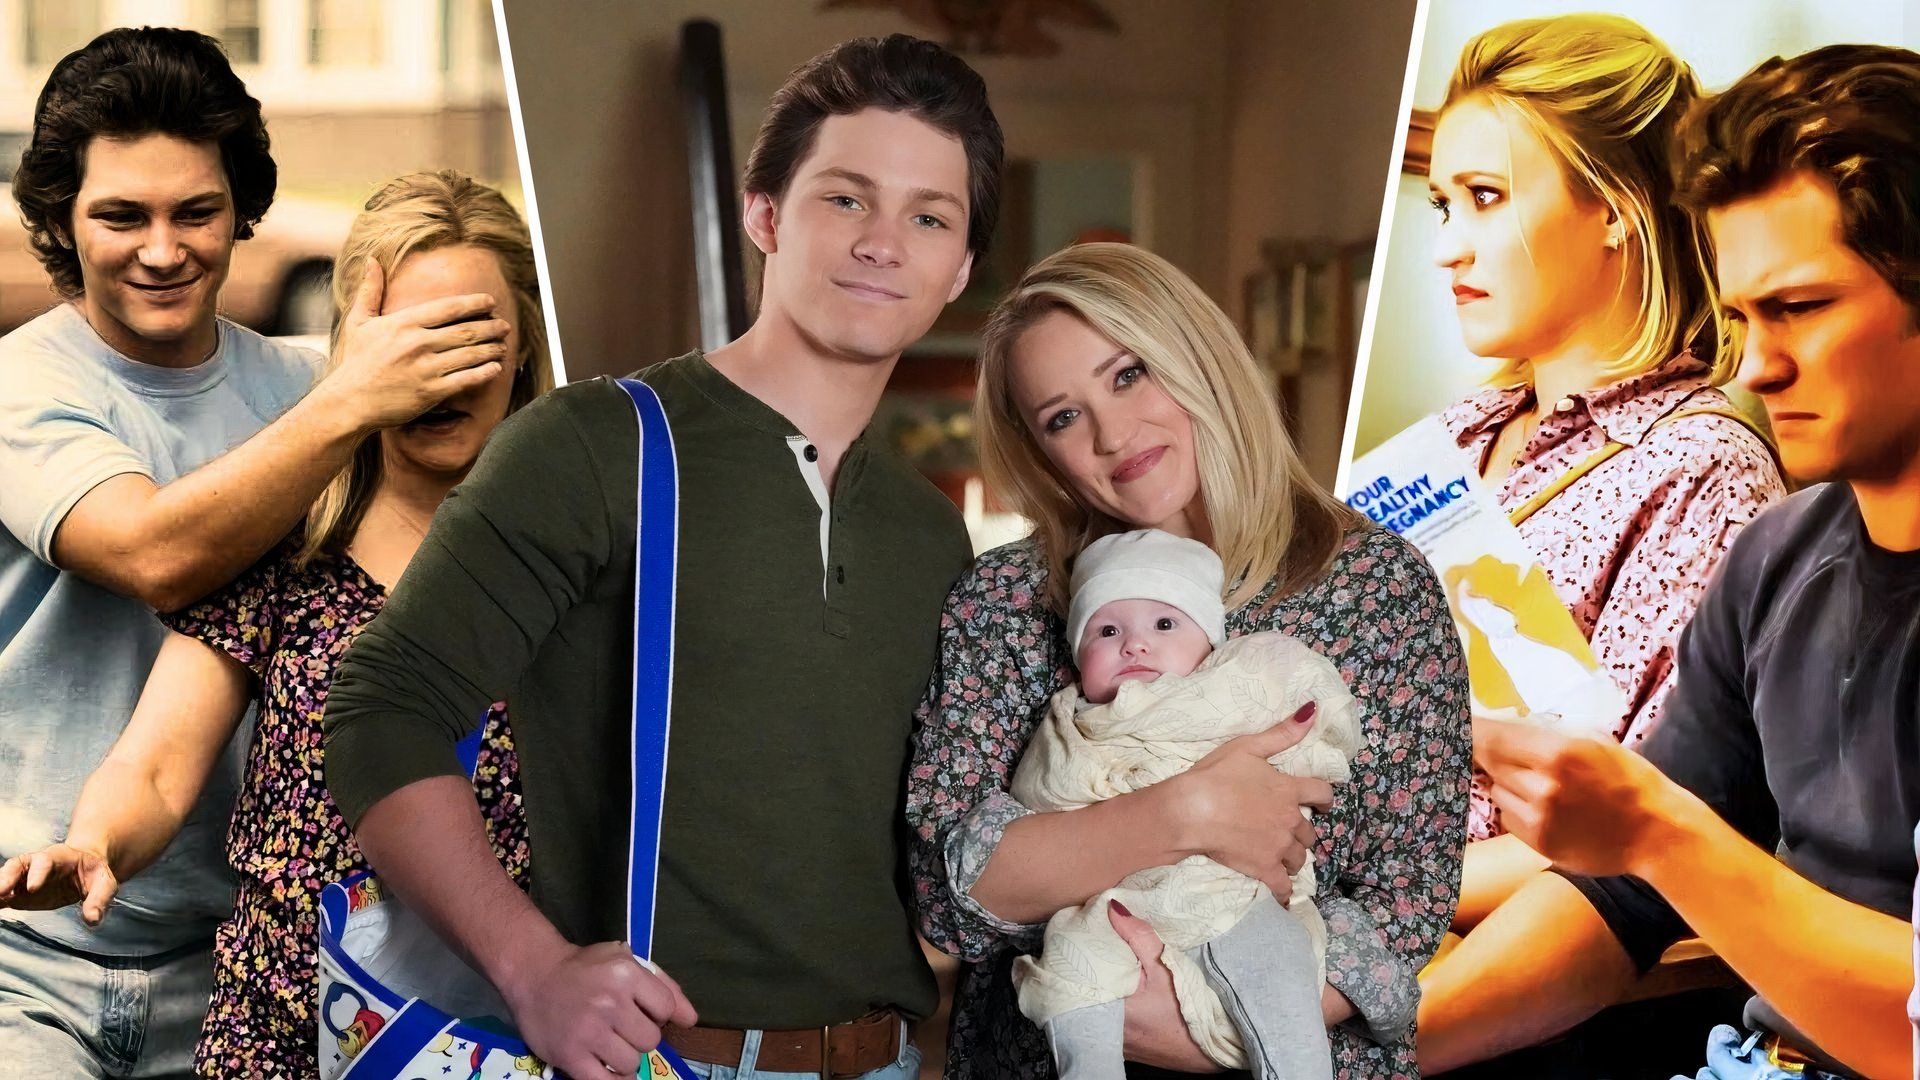 An edited image of Emiy Osment and Montana Jordan holding a baby in Young Sheldon